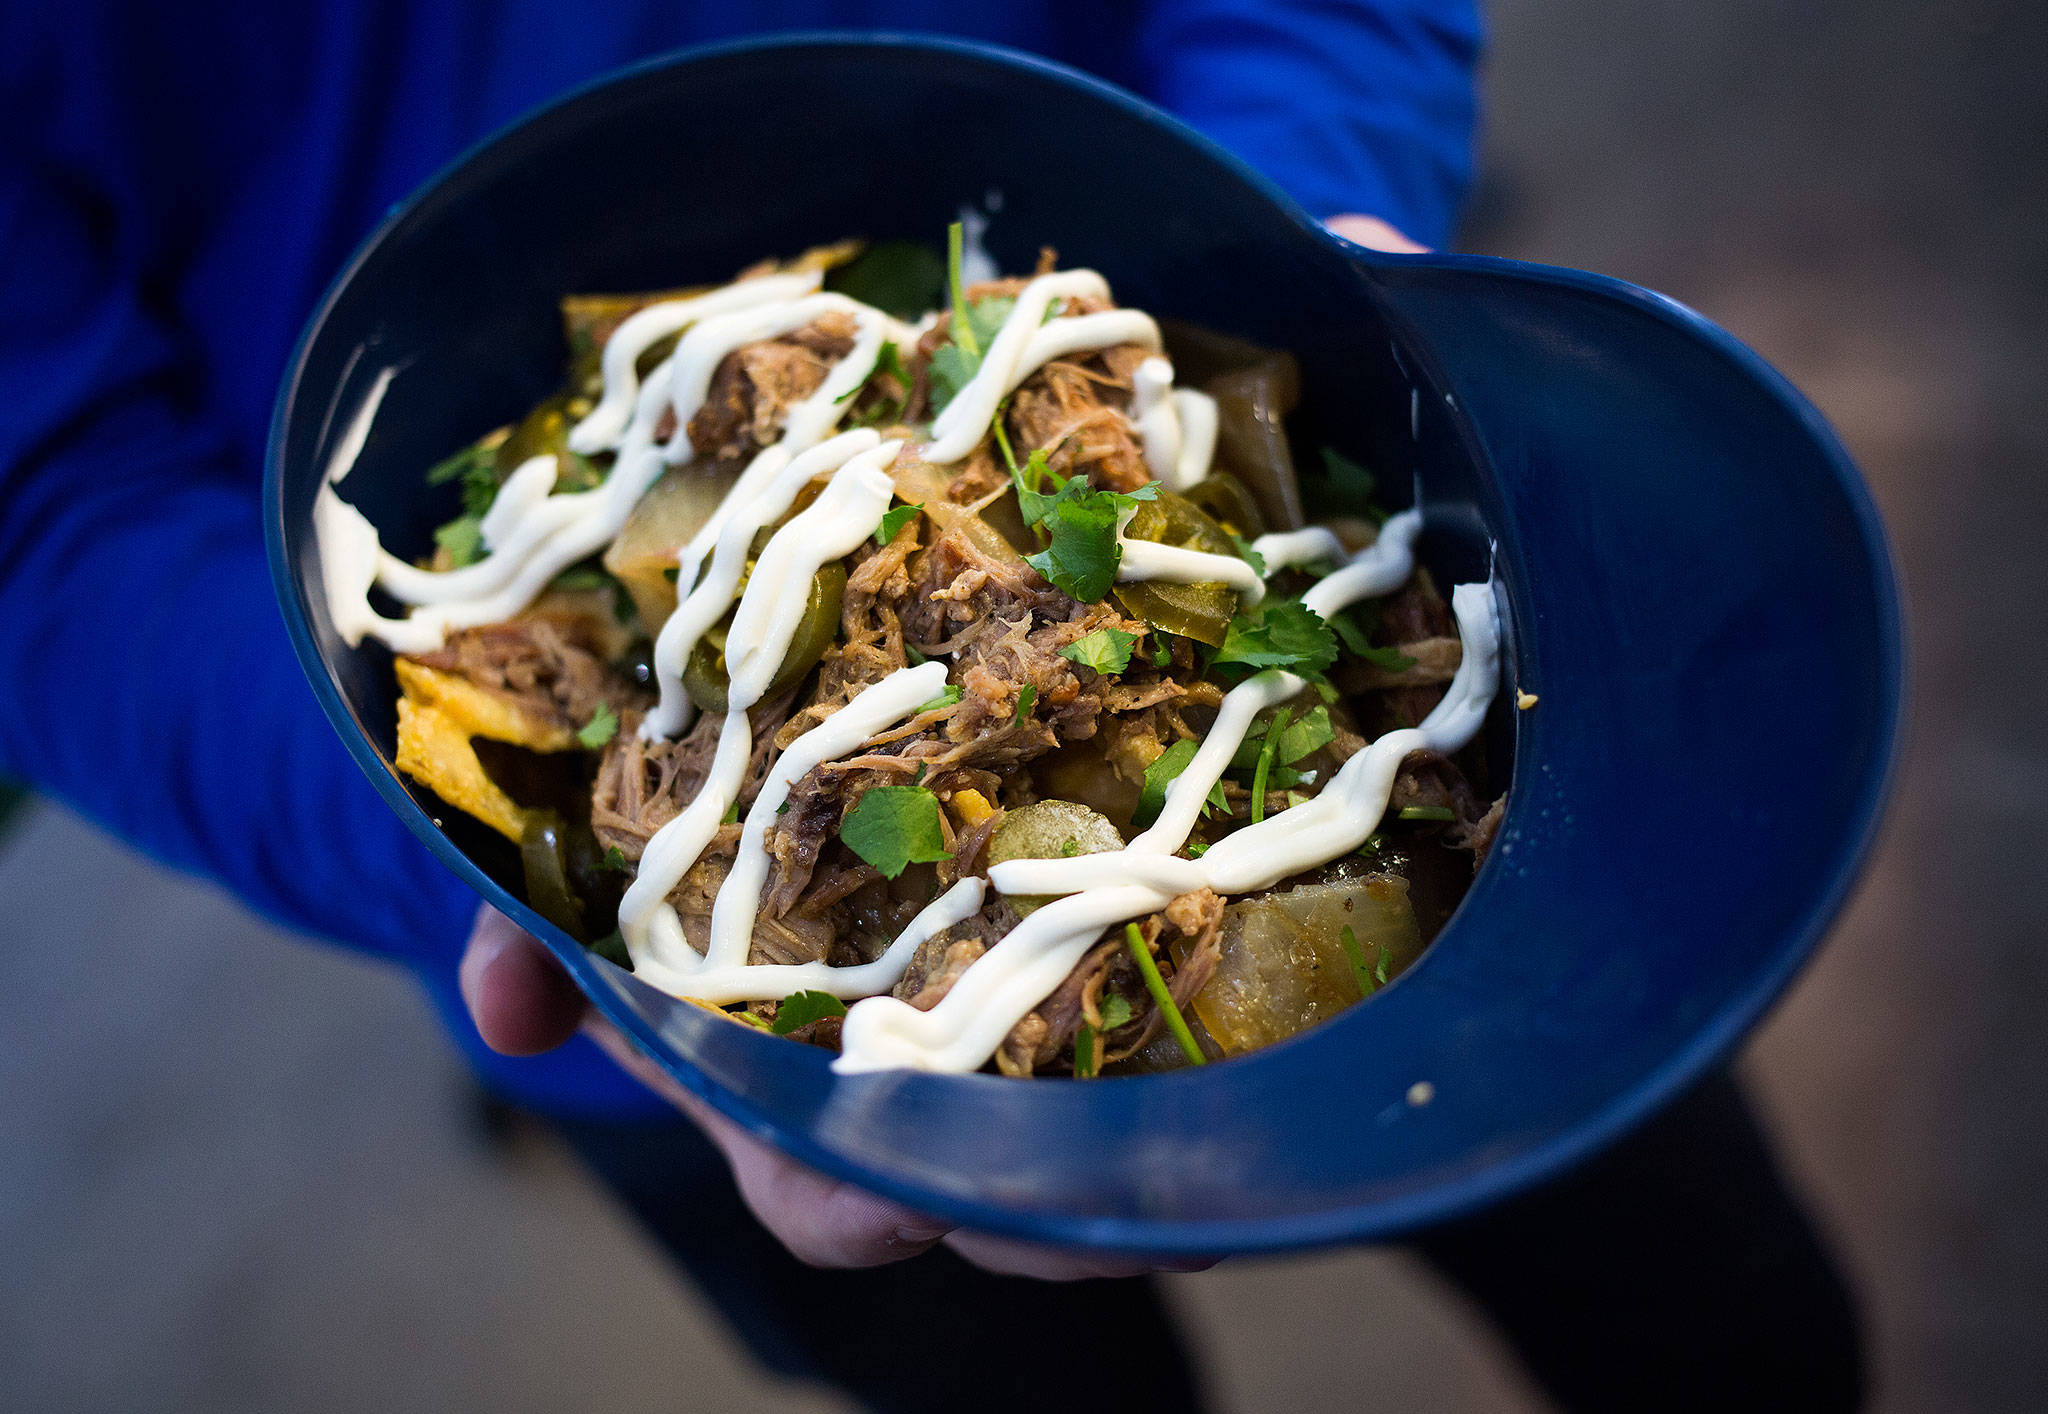 A family-size serving of Paseo’s Caribbean Nachos is served up in a Mariners helmet at T-Mobile Park. (Andy Bronson / The Herald)